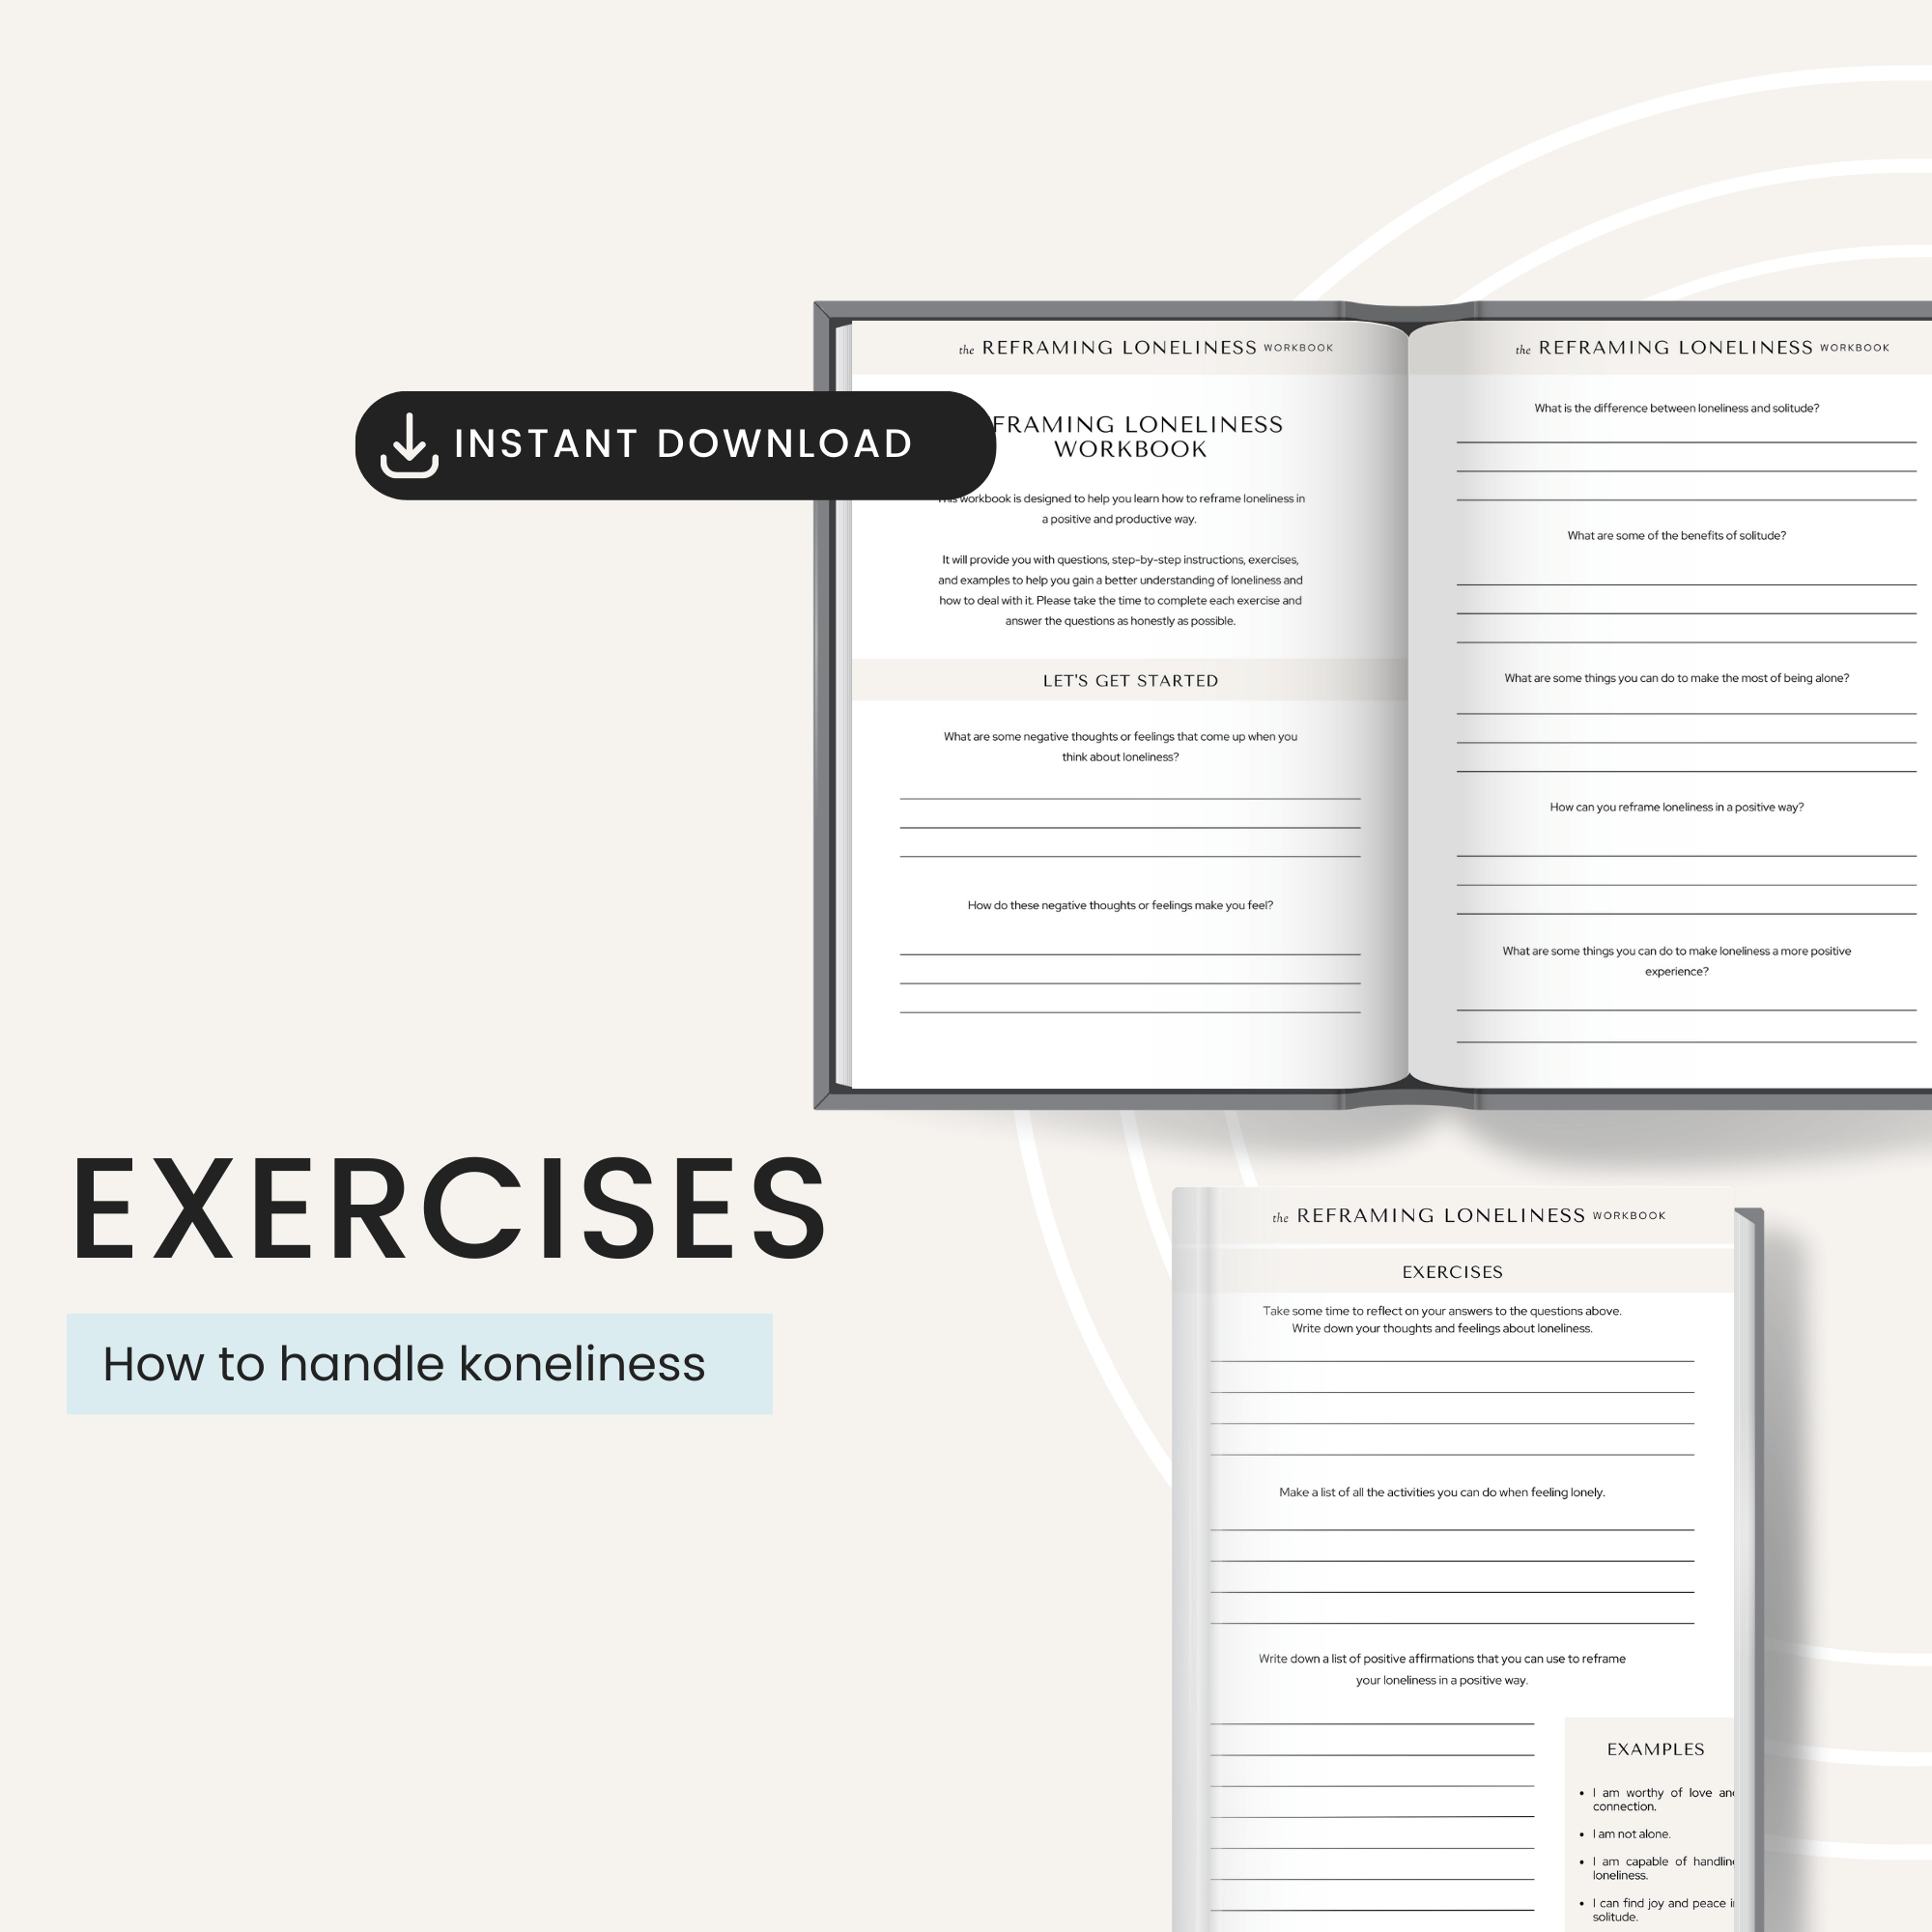 Reframing Loneliness Workbook Includes Exercises